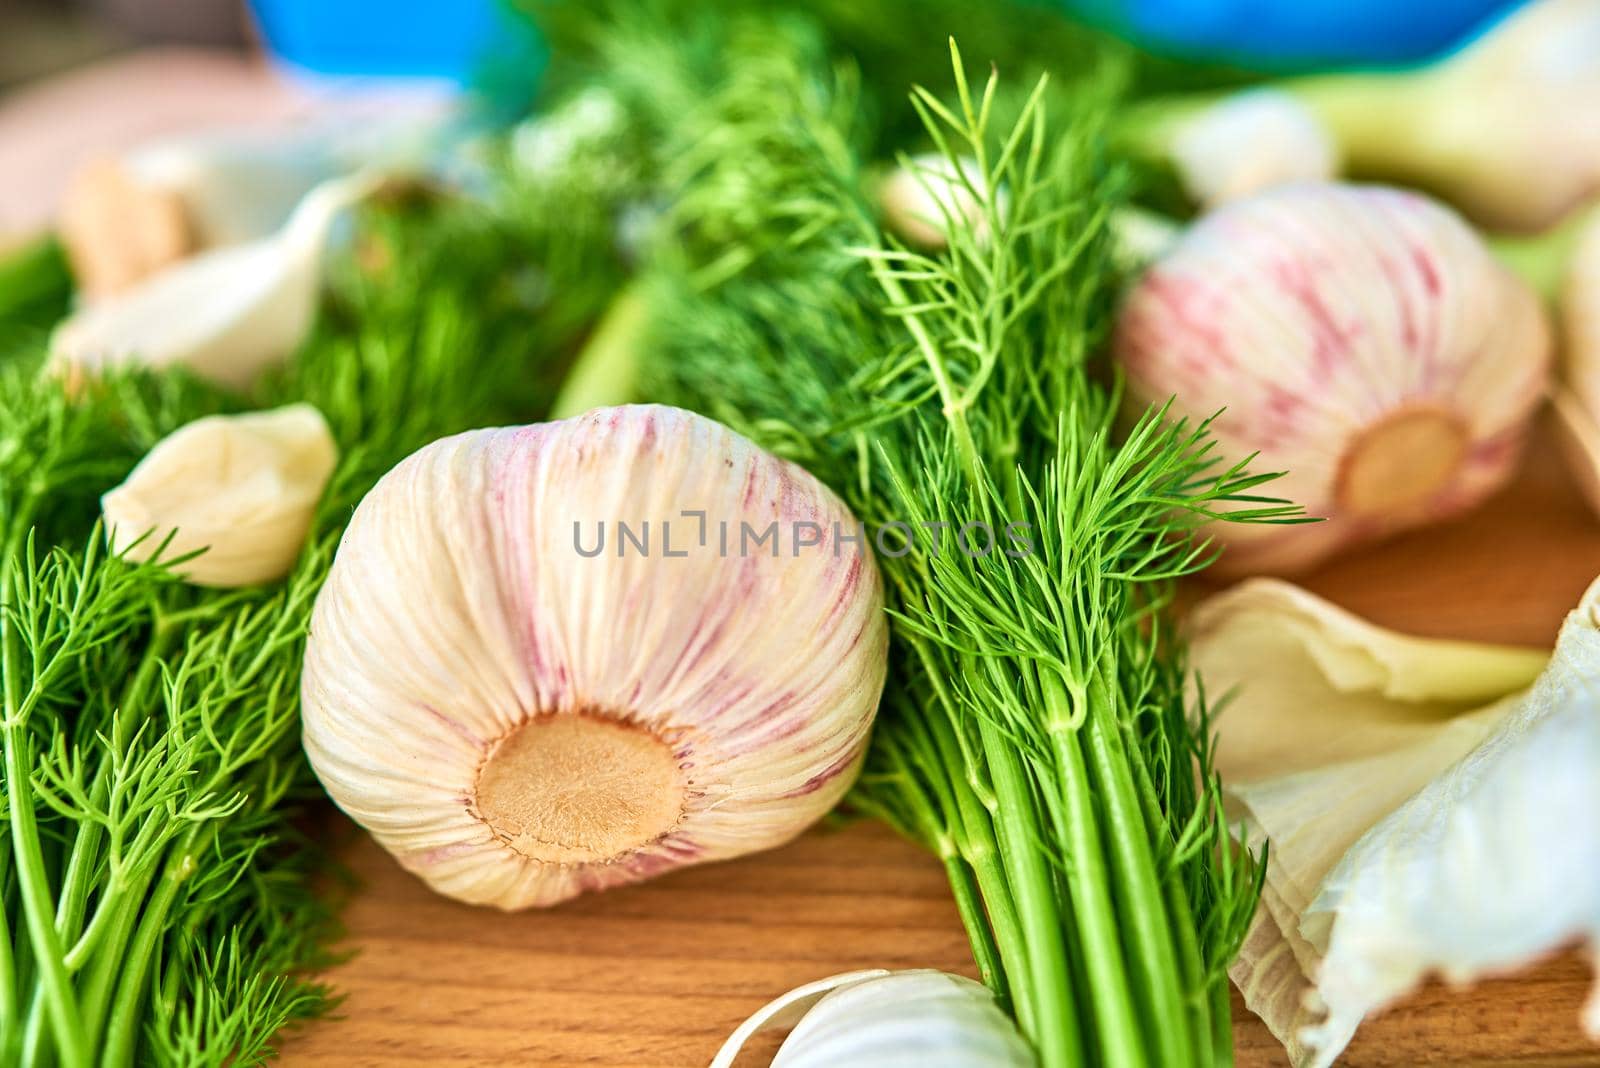 A few heads and cloves of young fresh garlic lie on a cutting board, surrounded by dill. Selective focus